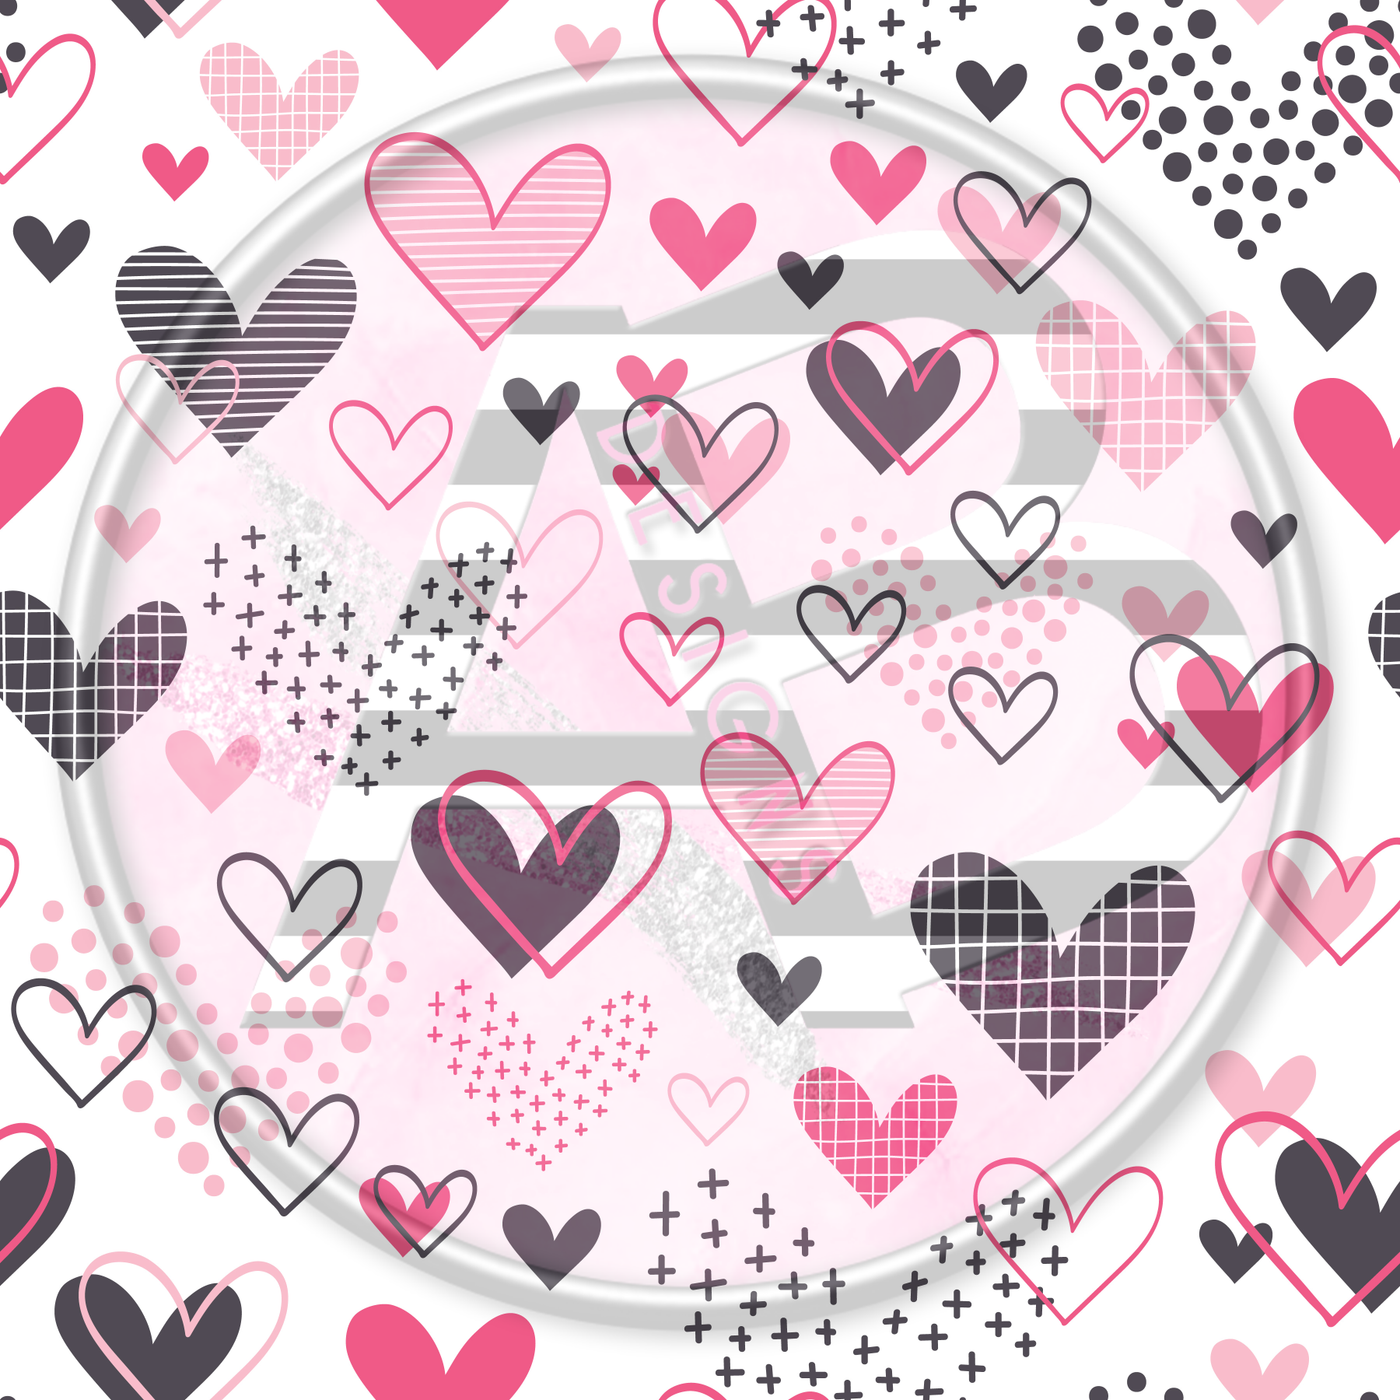 Adhesive Patterned Vinyl - Hearts 4